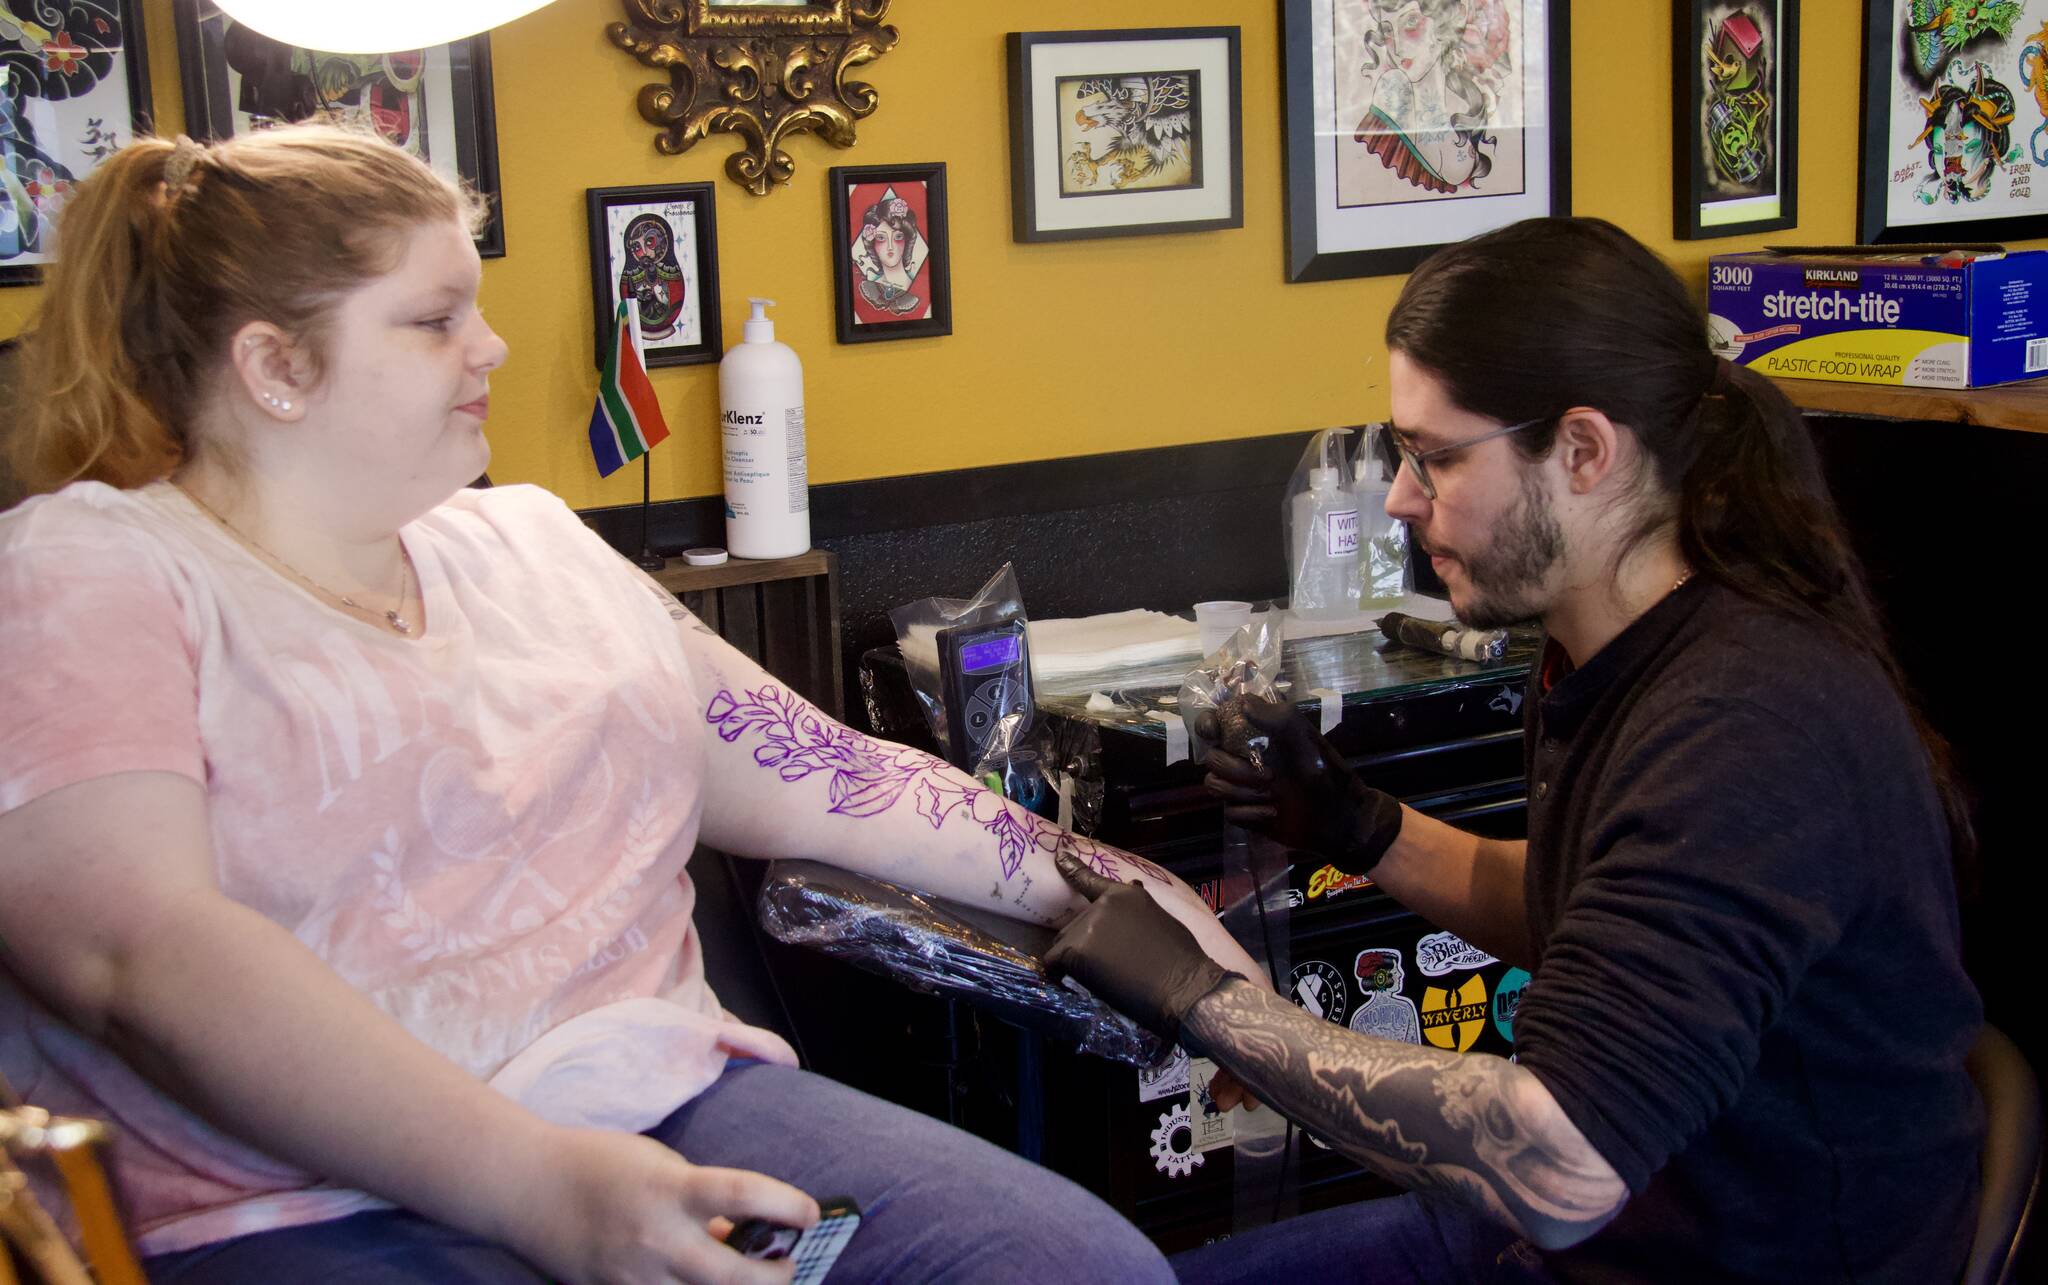 Photo by Rachel Rosen/Whidbey News-Times
Kyle-John McKenzie, who recently moved from South Africa, tattoos a floral piece on Jessica Broadfield.